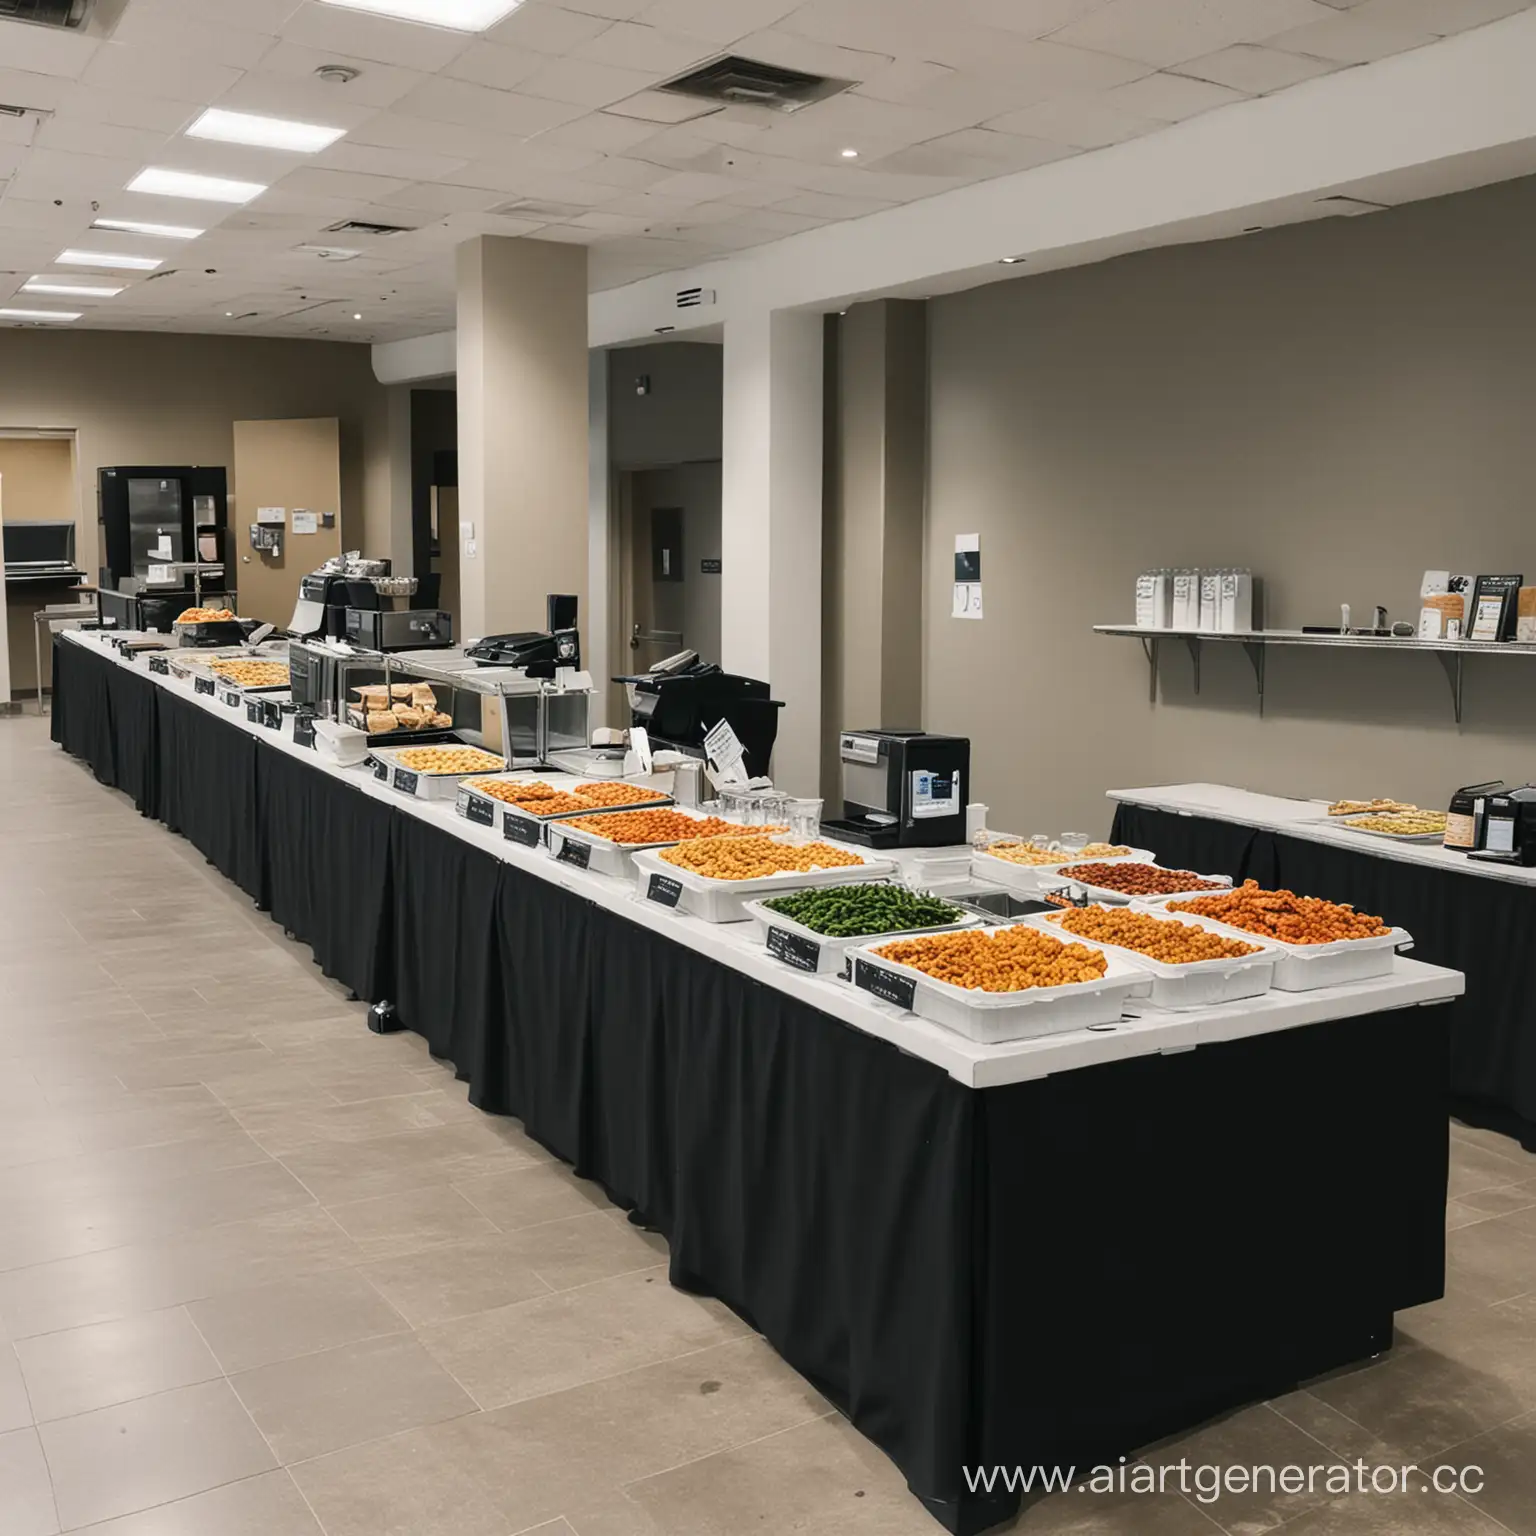 Point-of-Sale-Station-with-Efficient-Catering-Services-in-a-Modern-Building